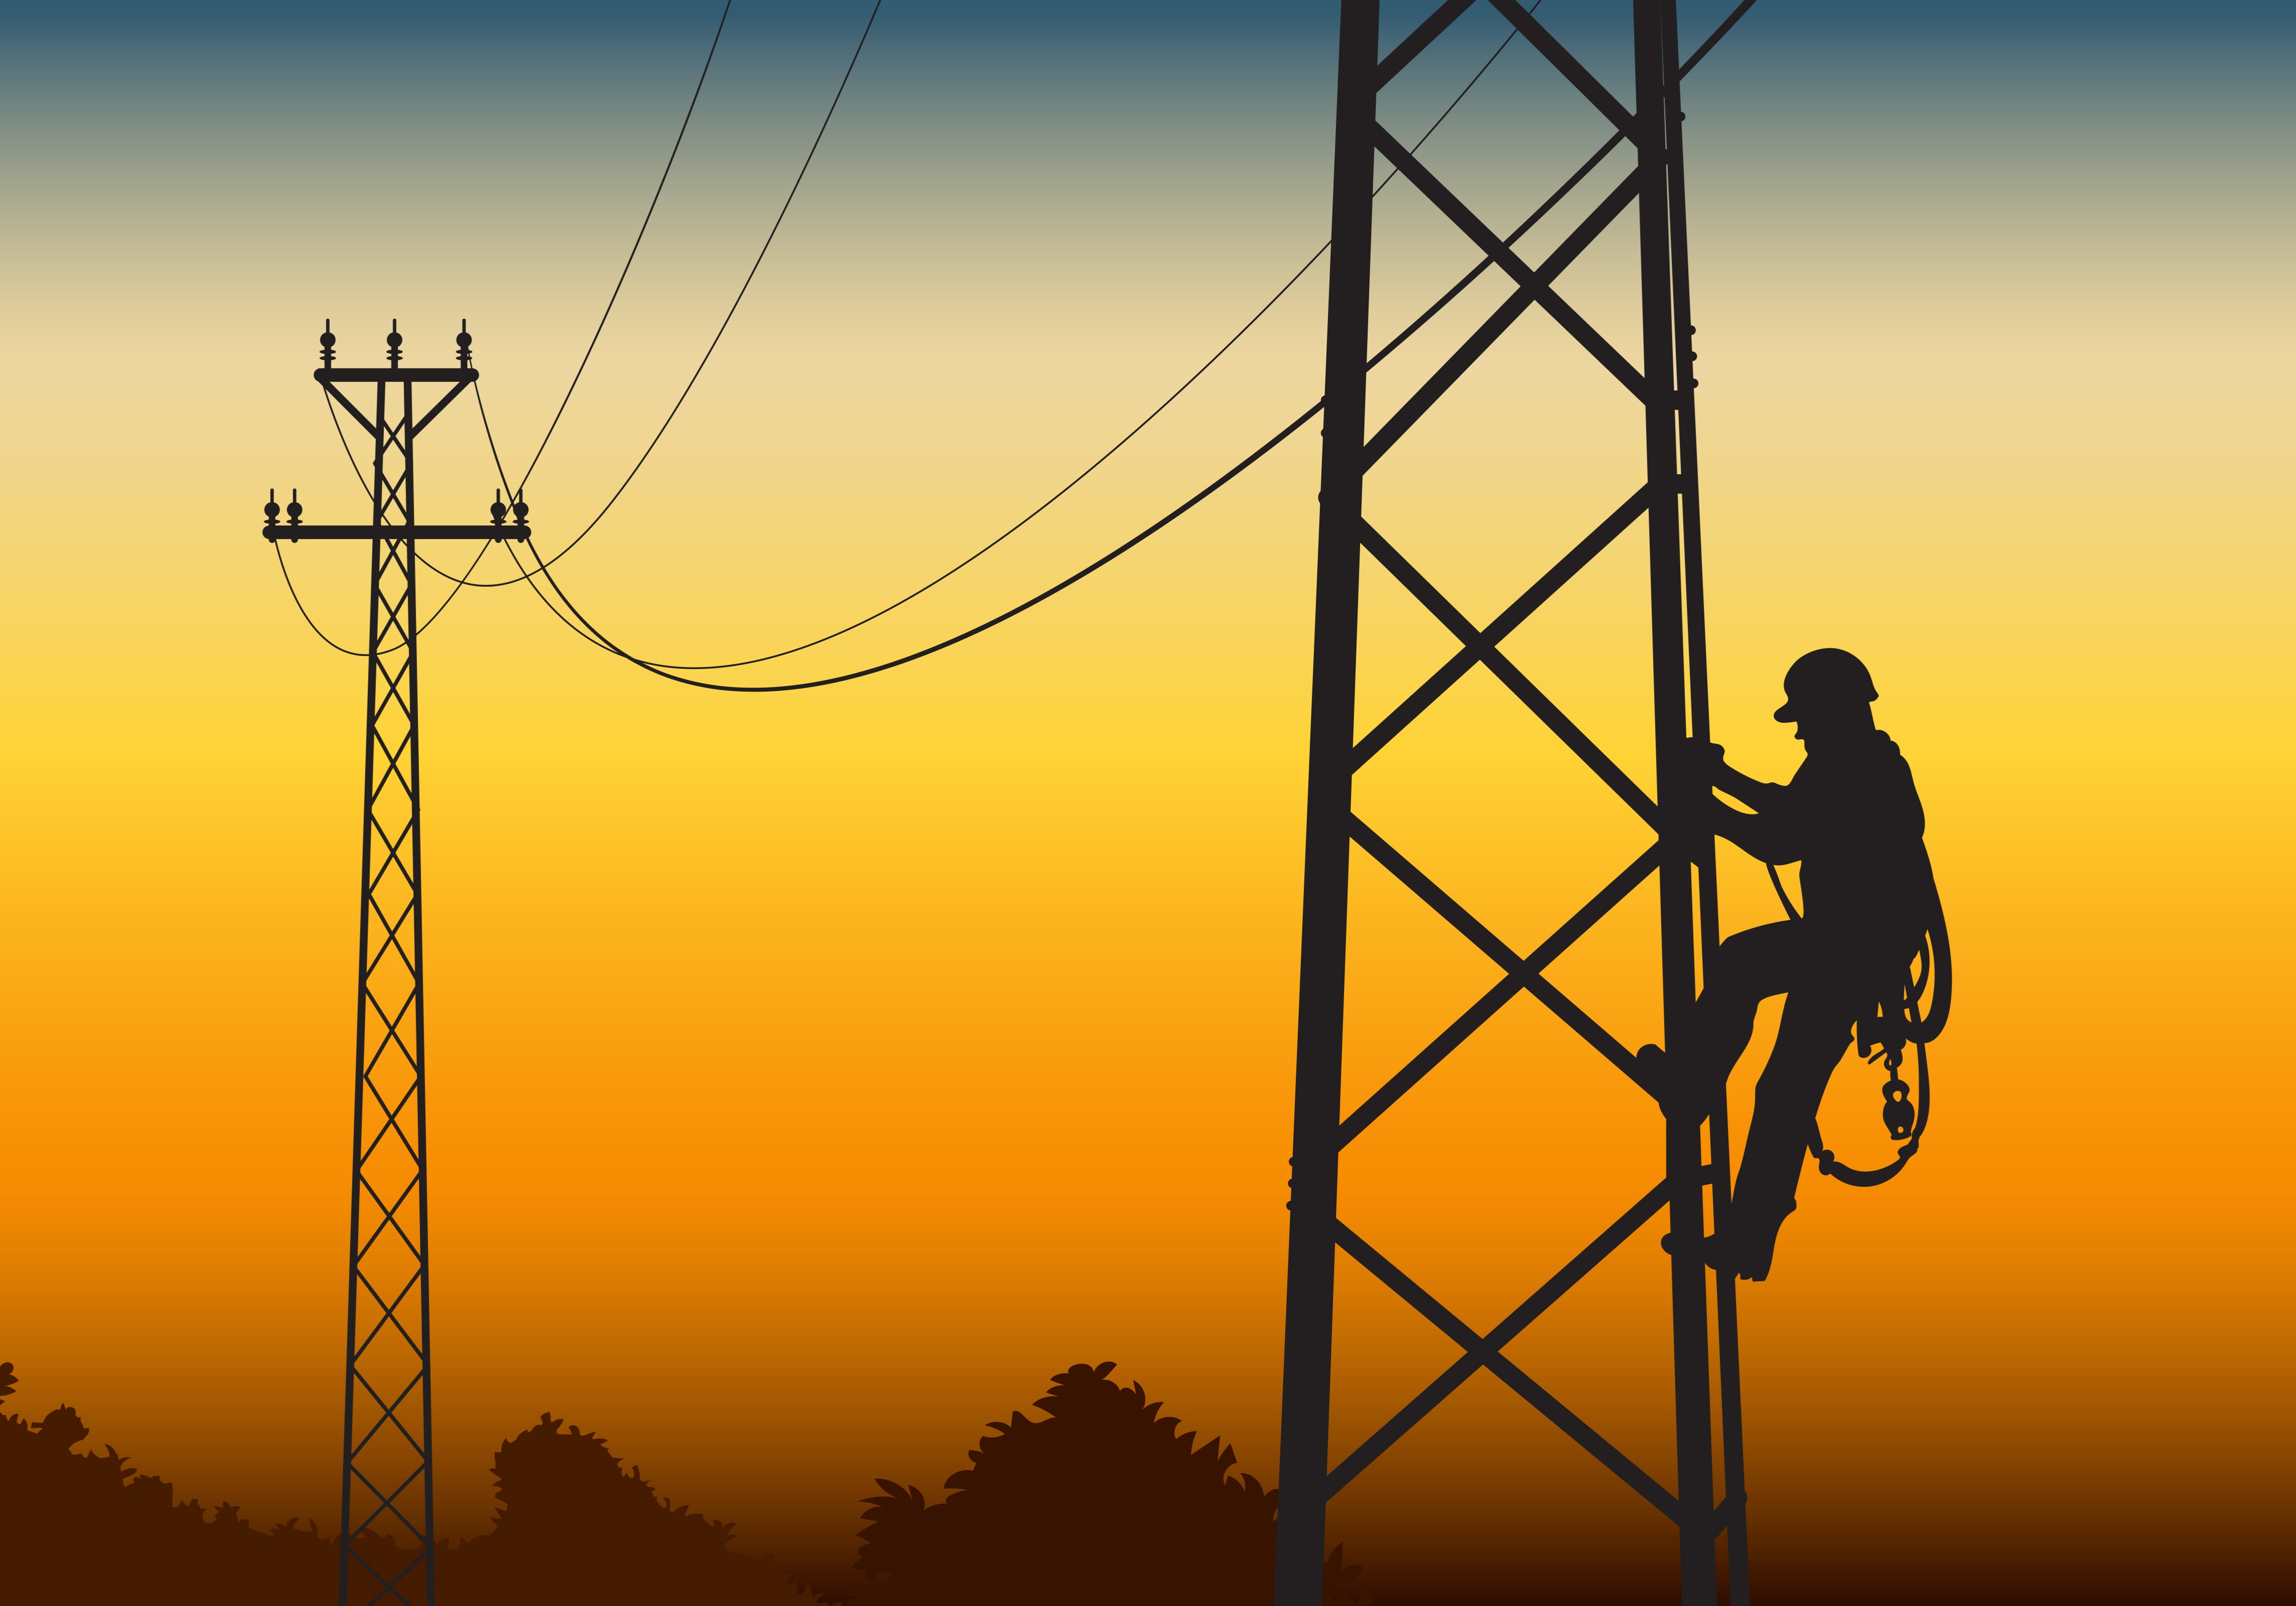 Lineman working on a power line at dusk.